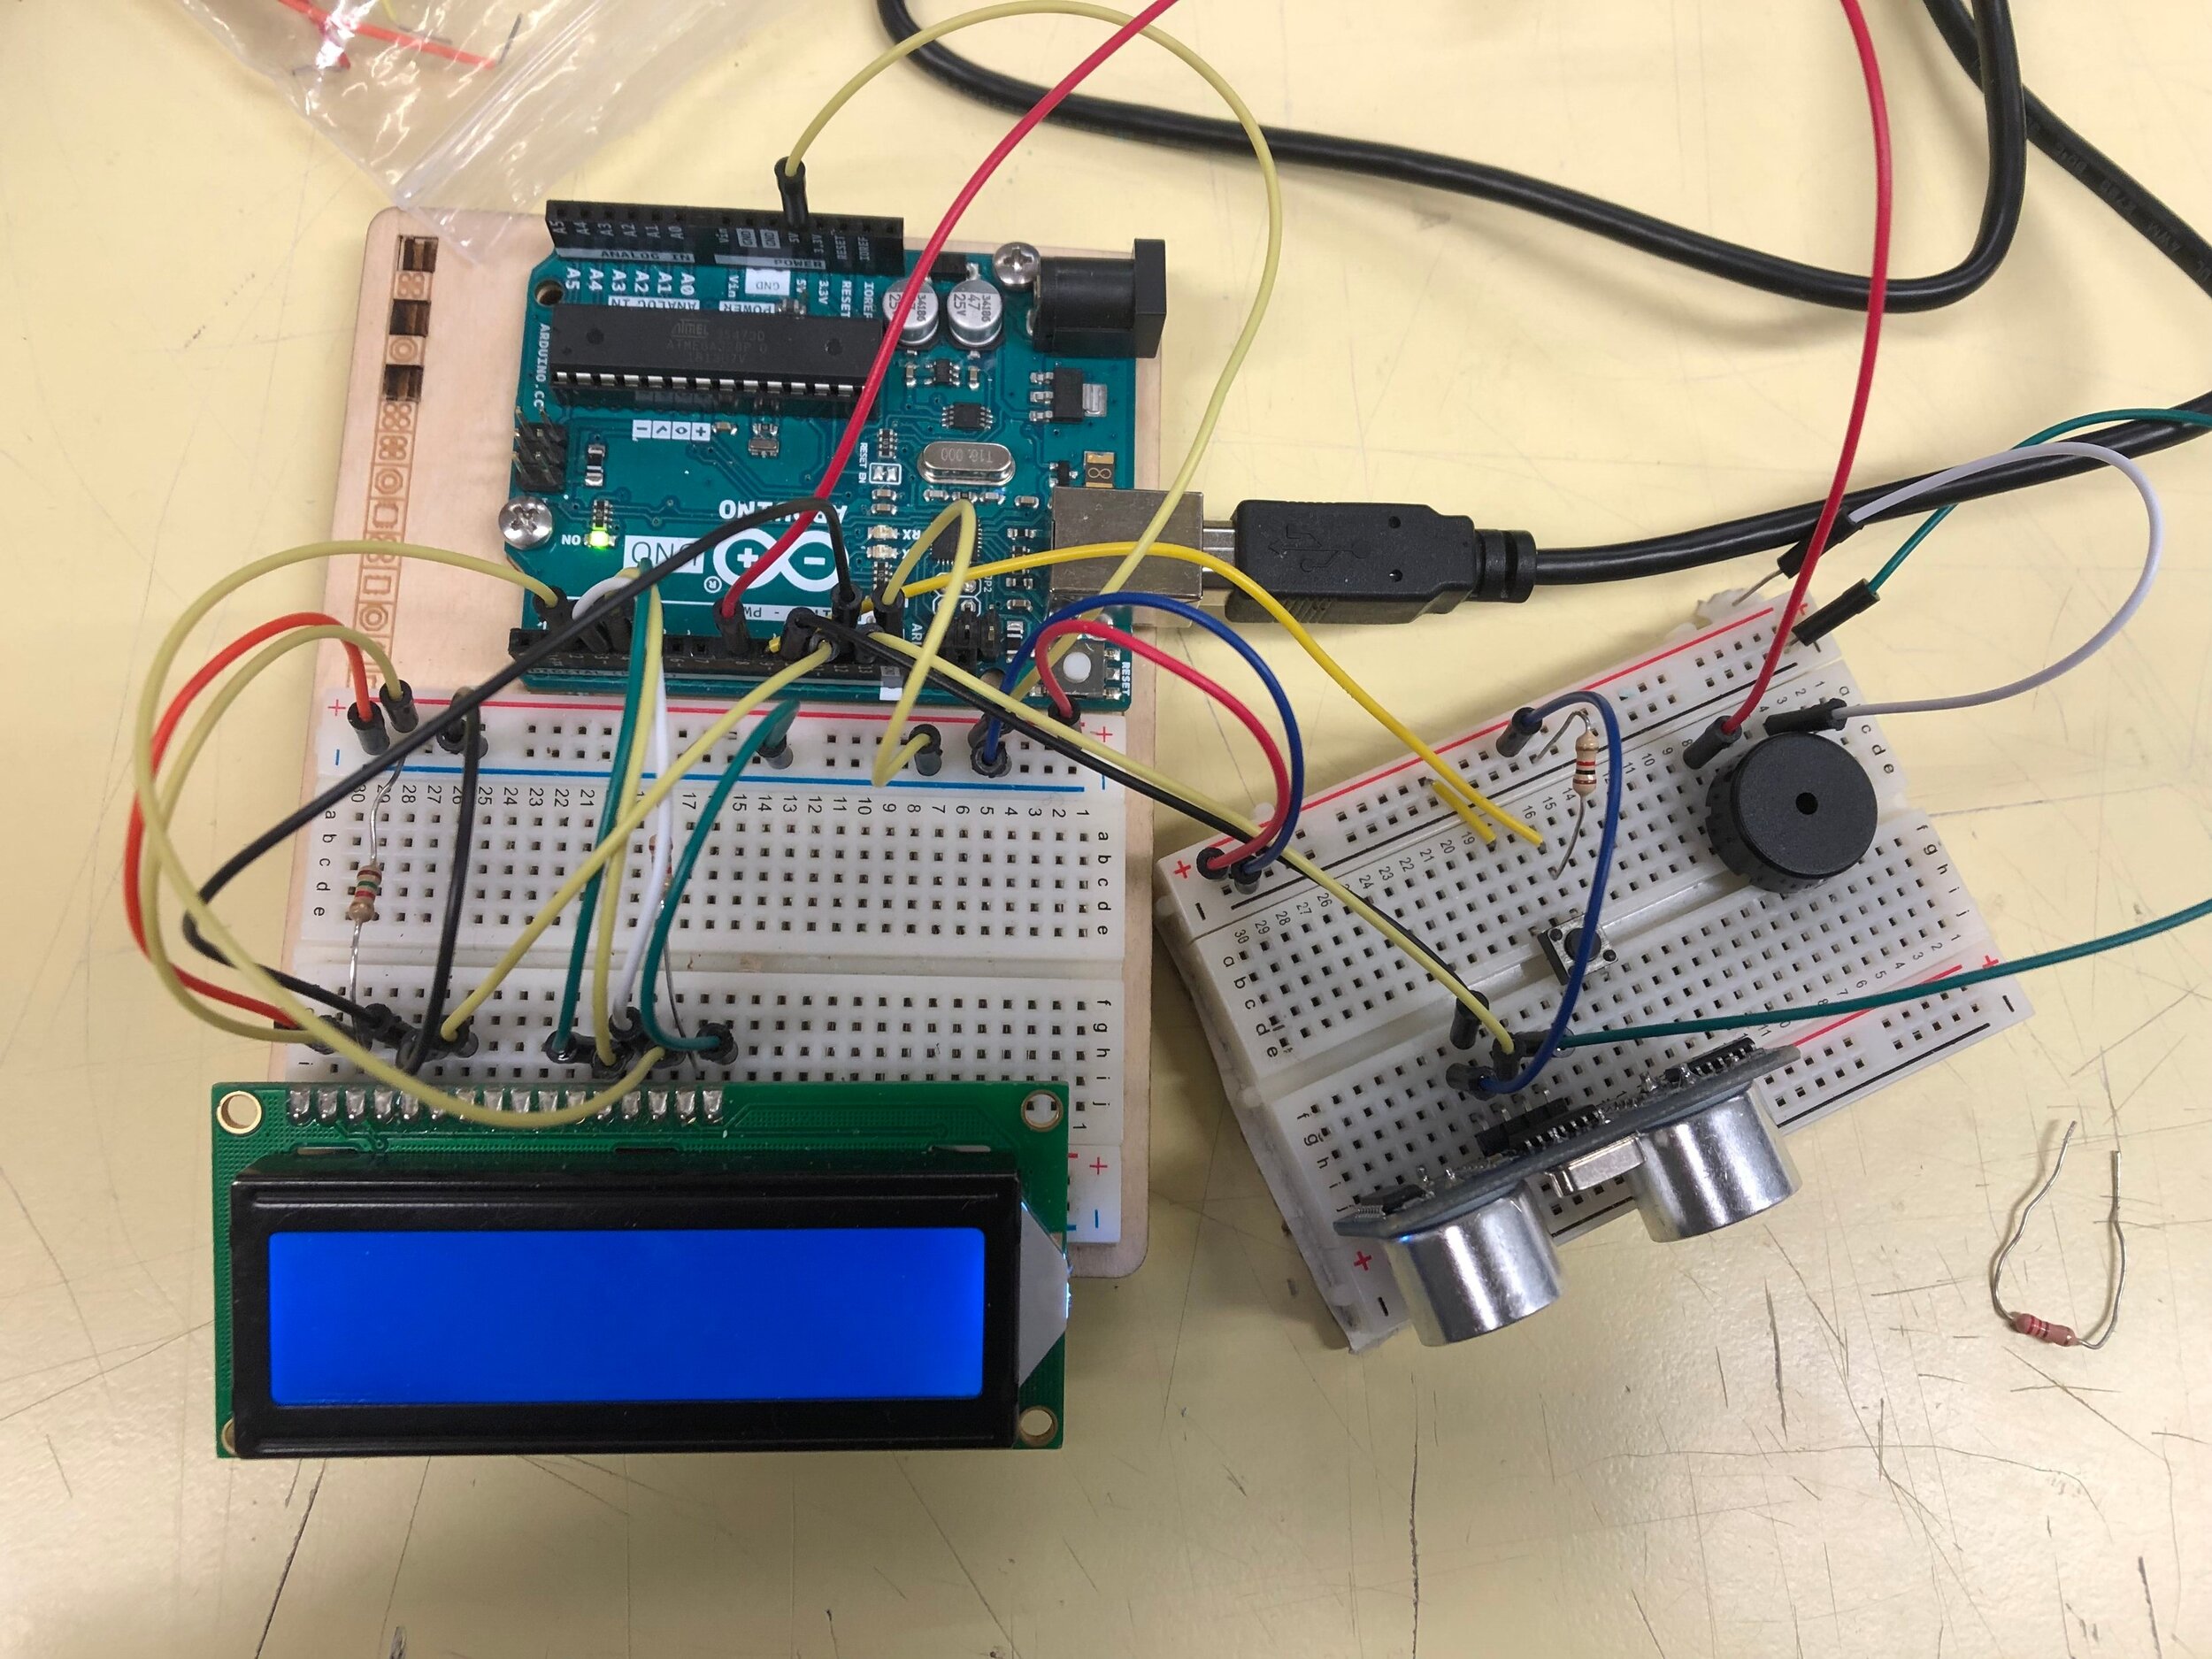 Final Wiring and coding of the Arduino